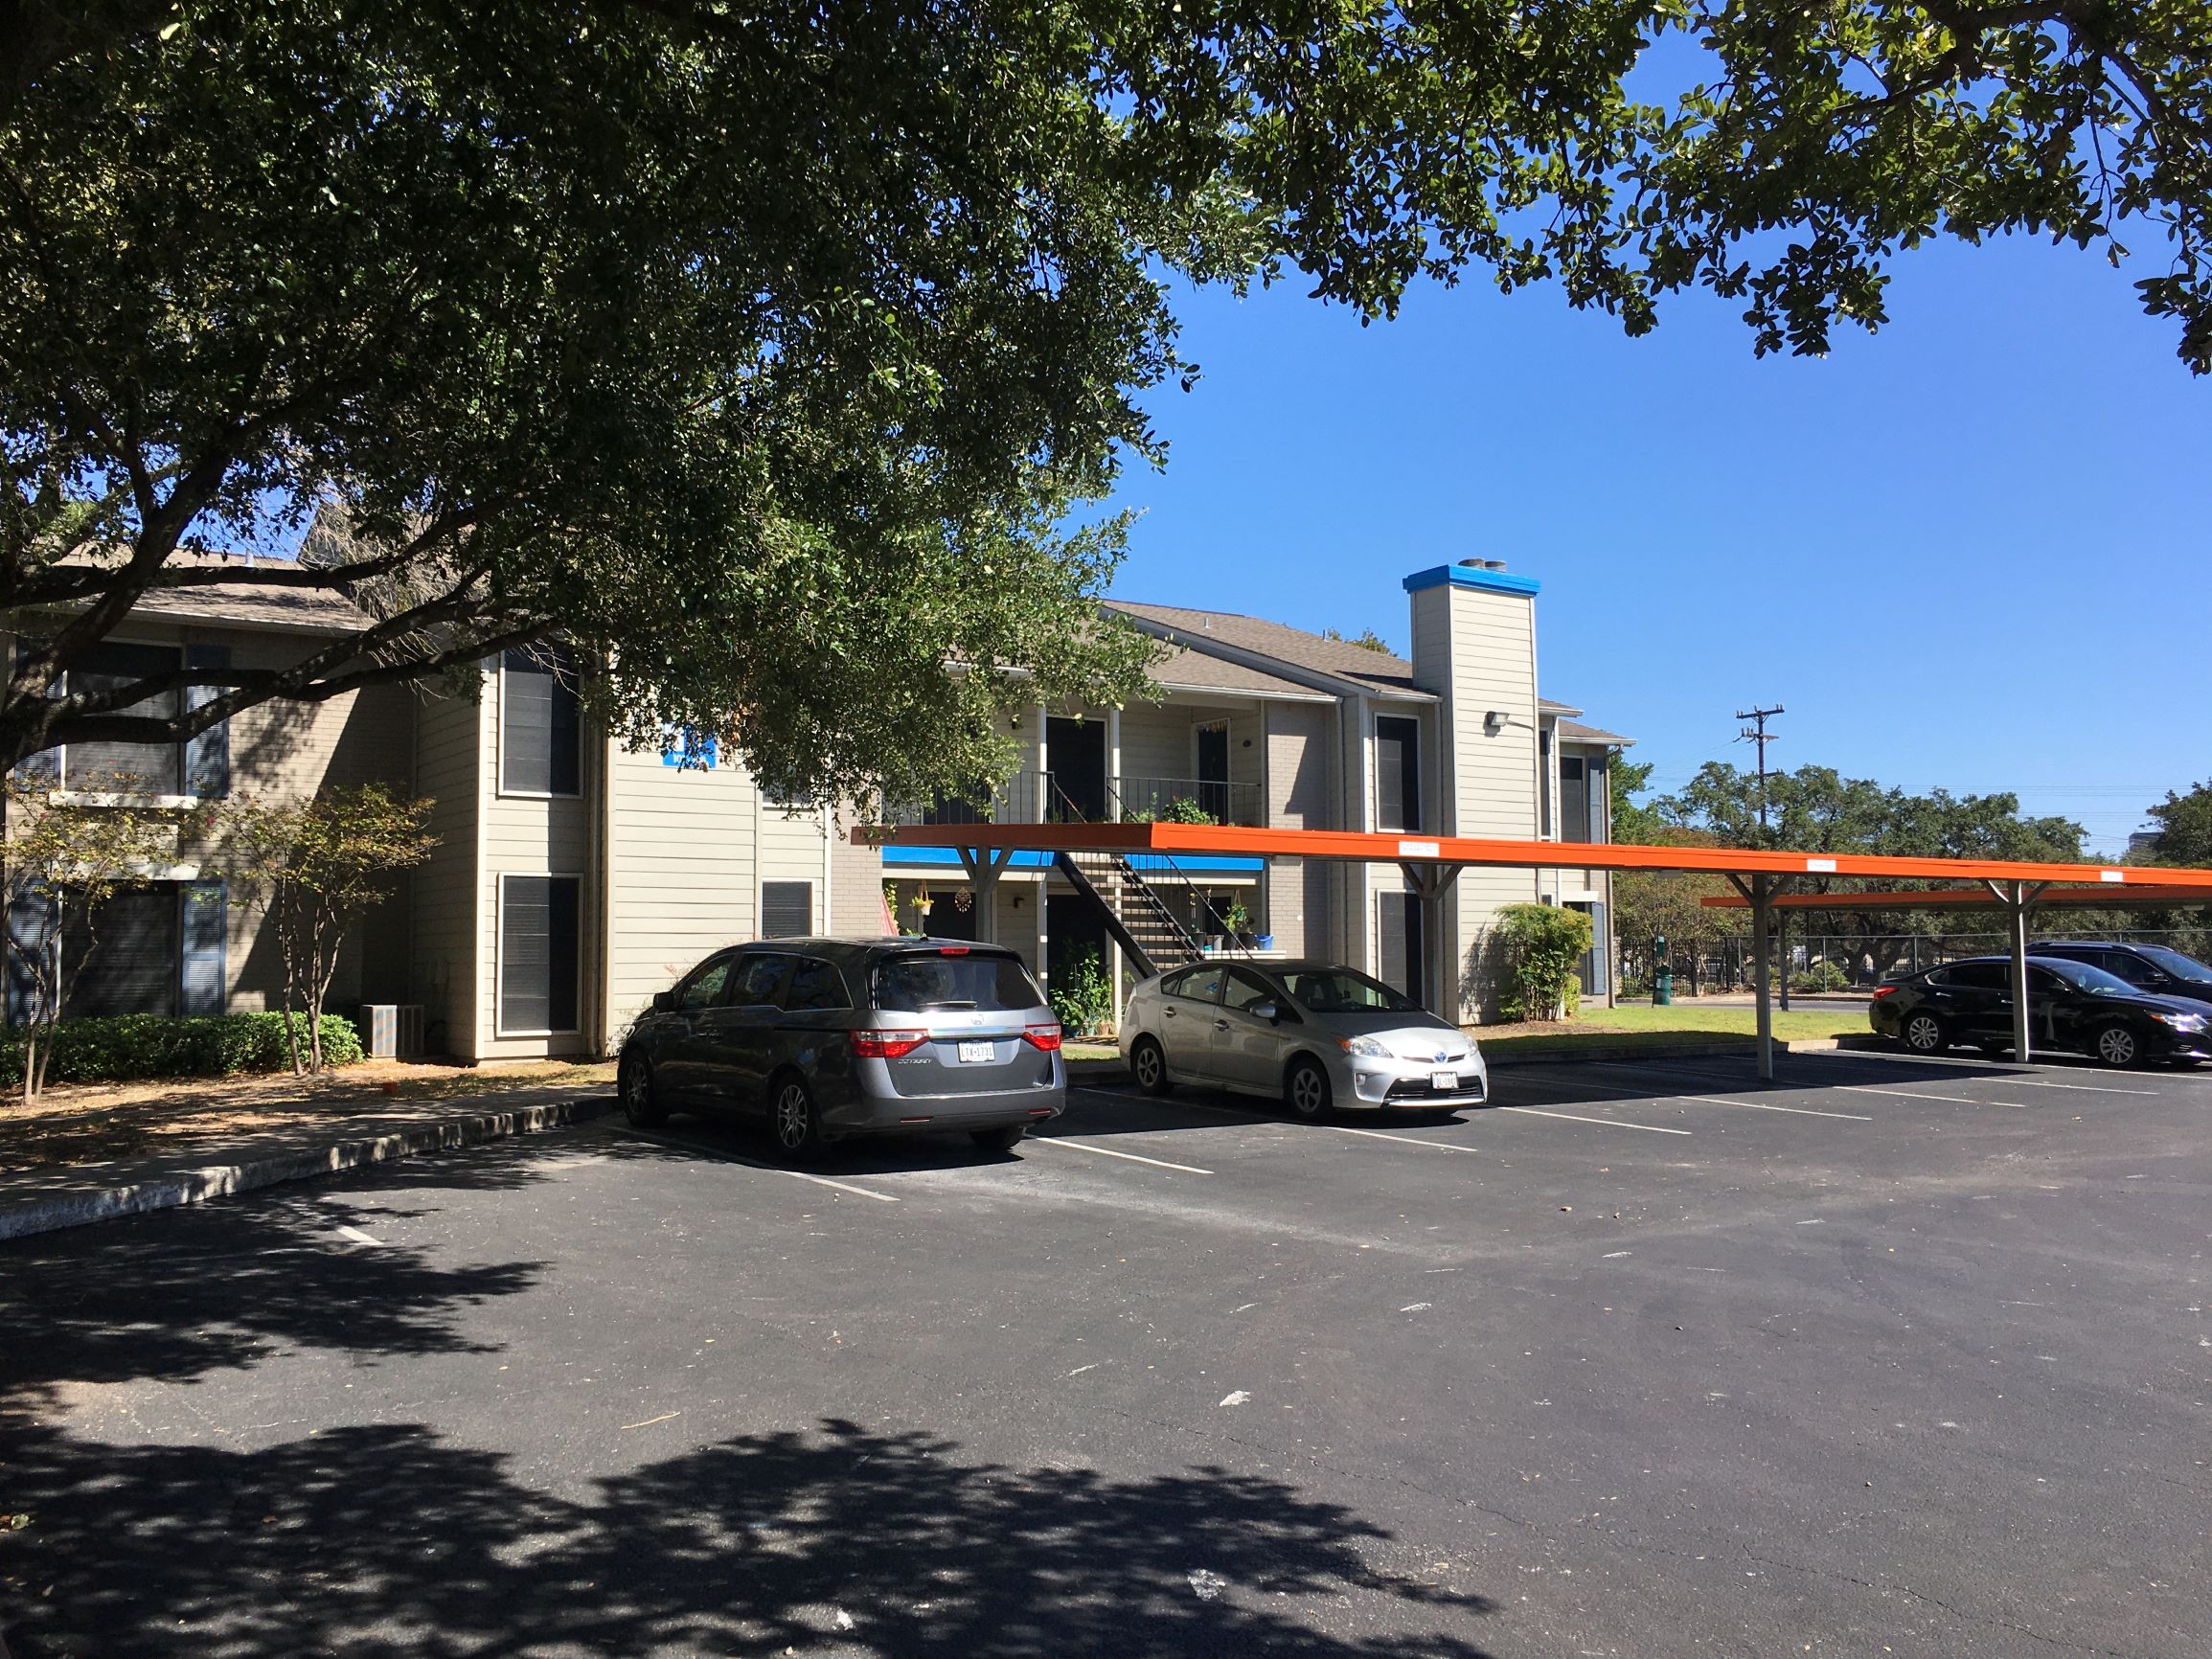 Ample Parking Spaces at Sapphire Apartments in San Antonio, TX